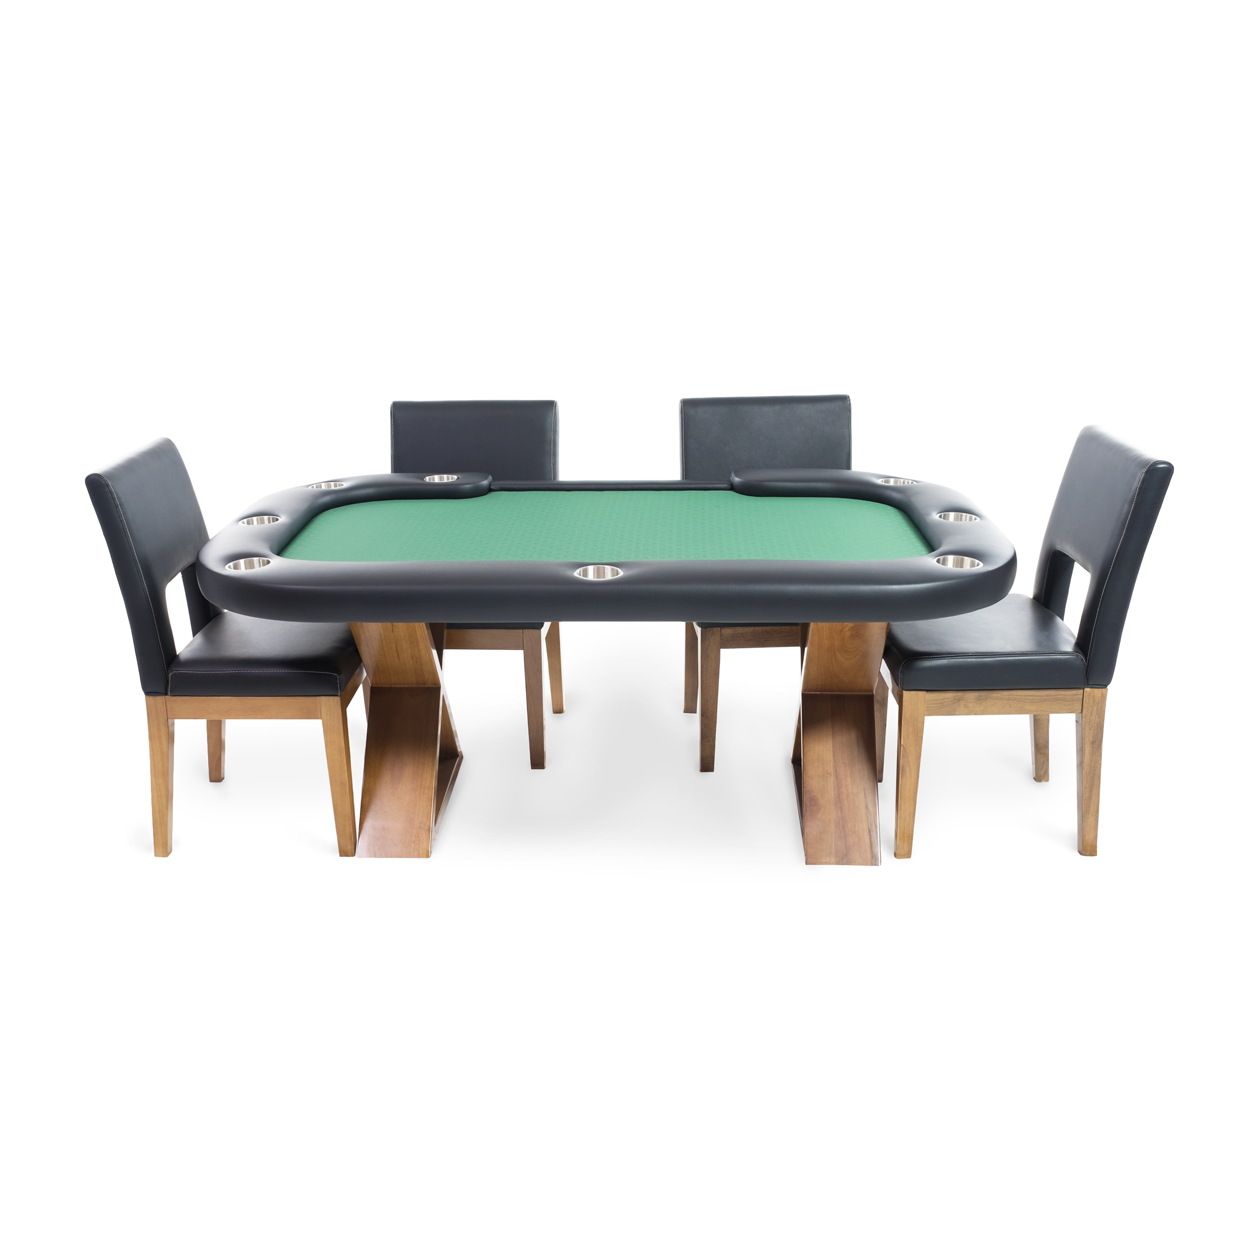 BBO Helmsley Poker Table Dealers Cut Green and Chairs